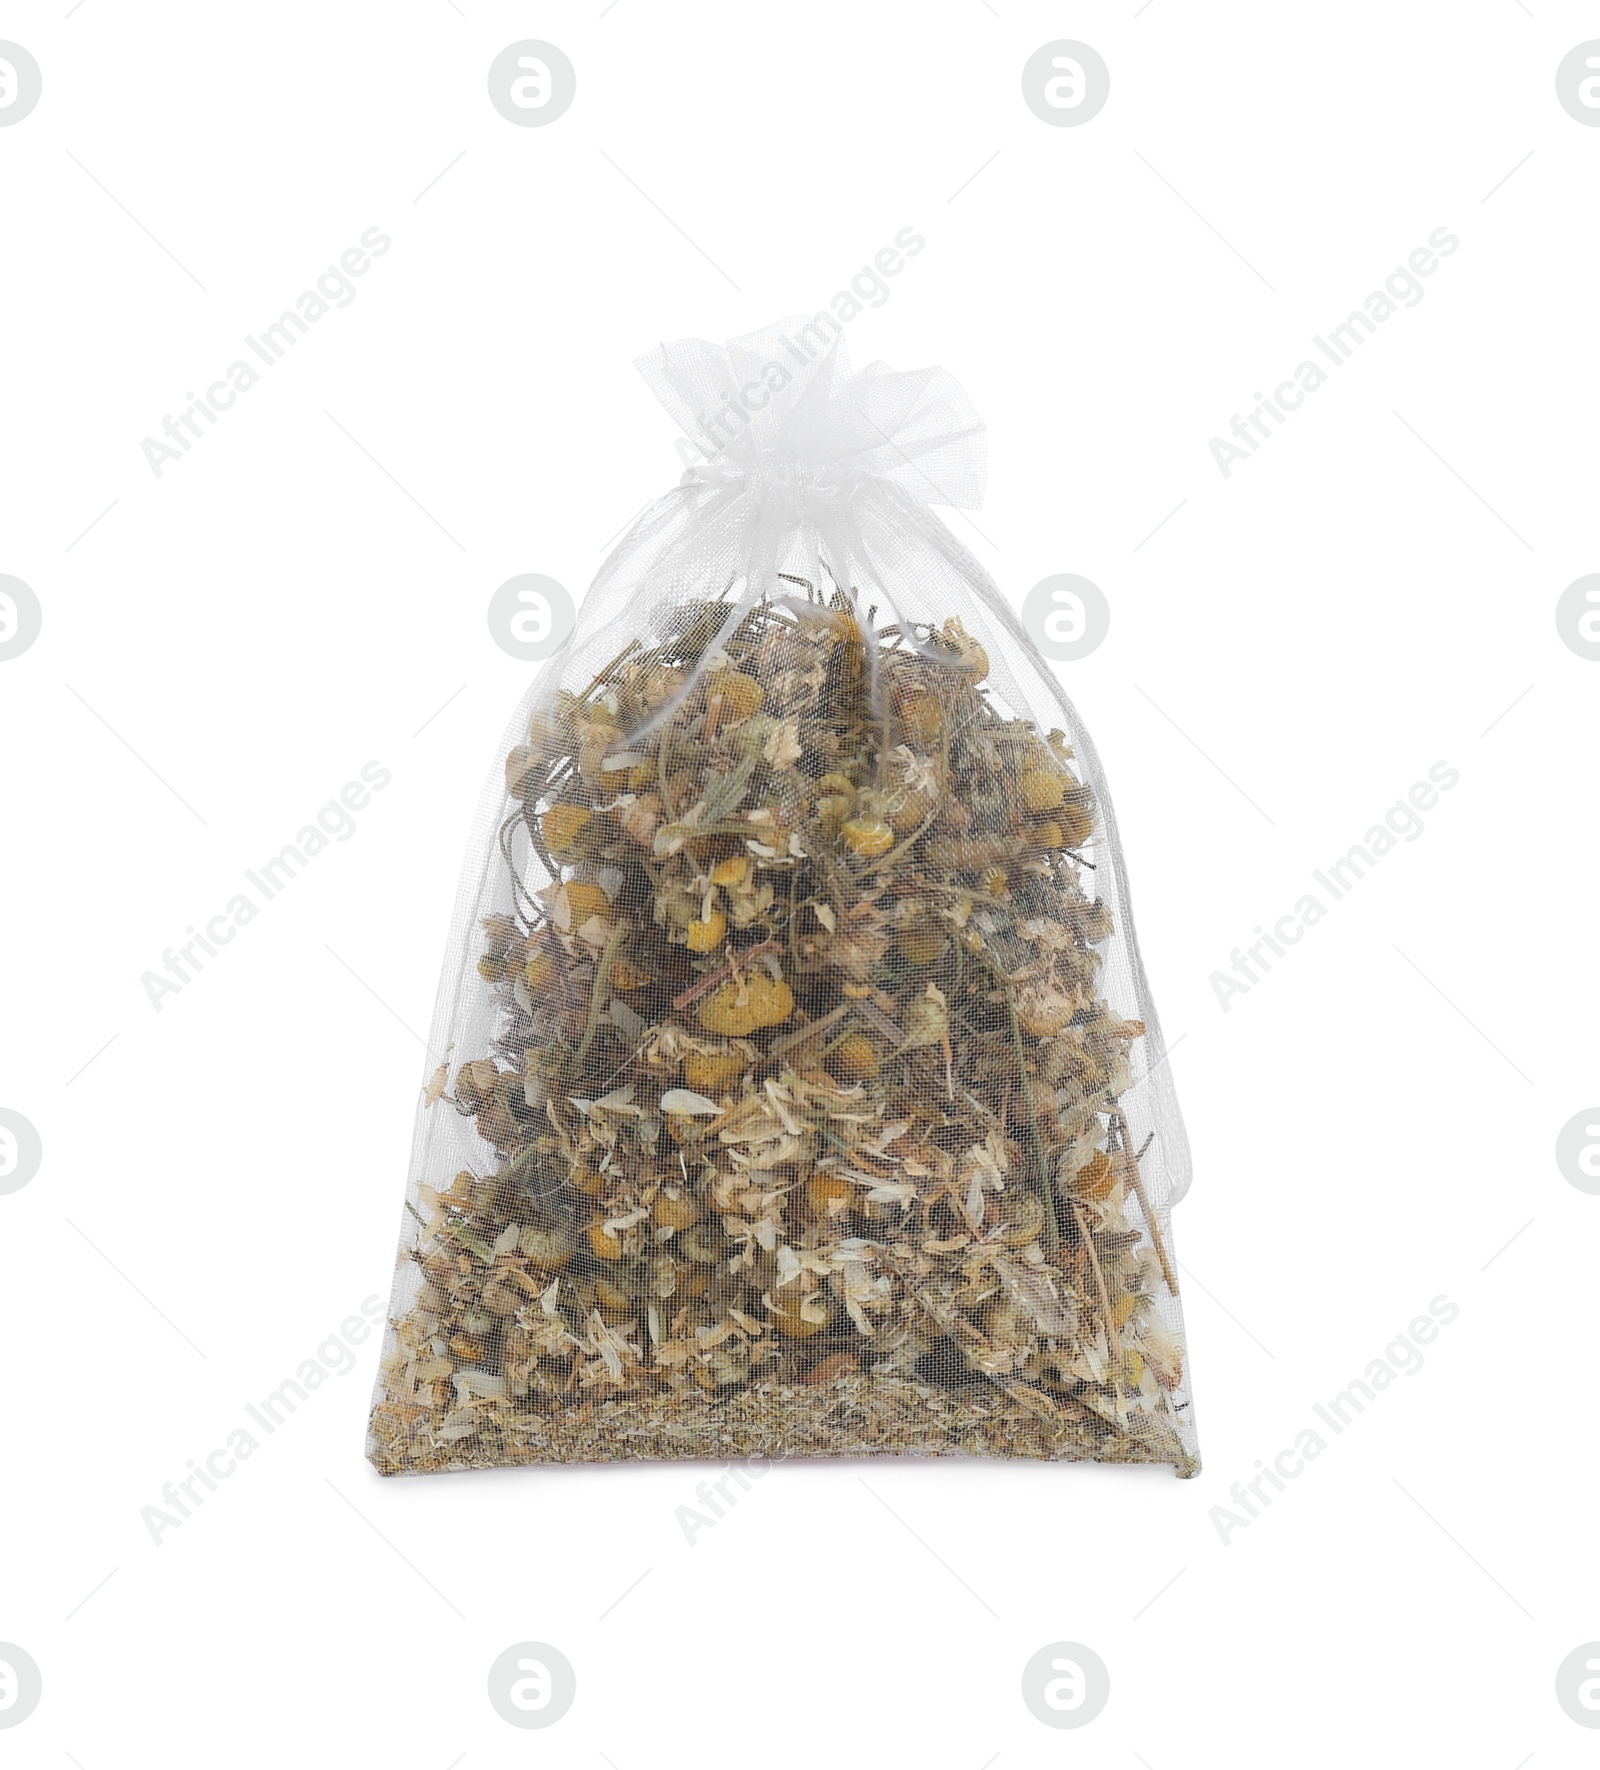 Photo of Scented sachet with dried chamomile flowers isolated on white